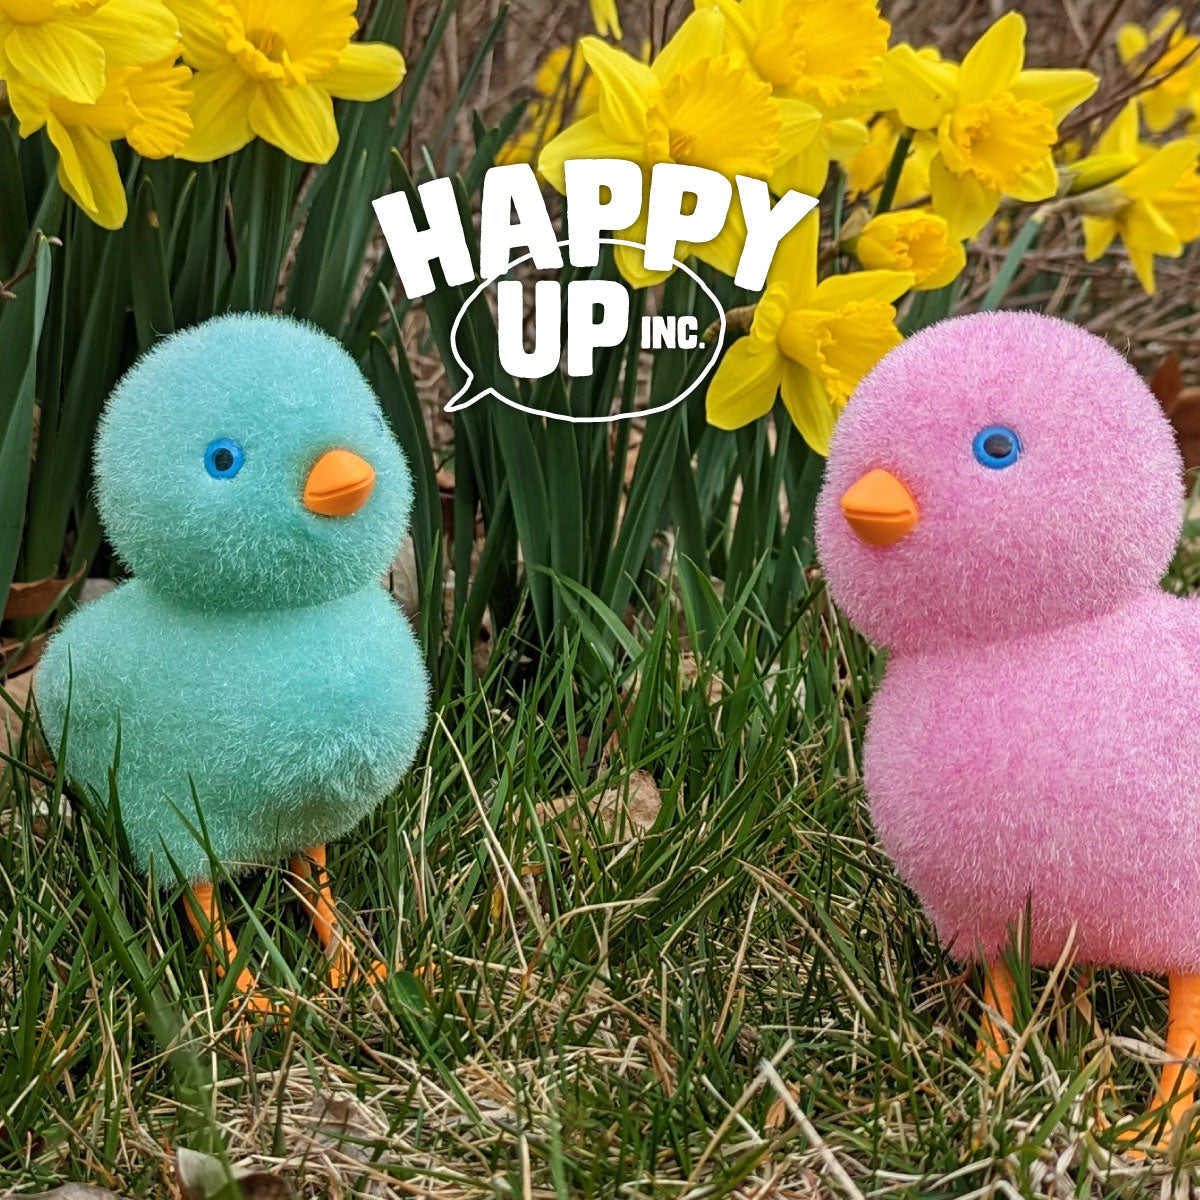 Flocked Chicks, Bunnies, and More - In Store Only